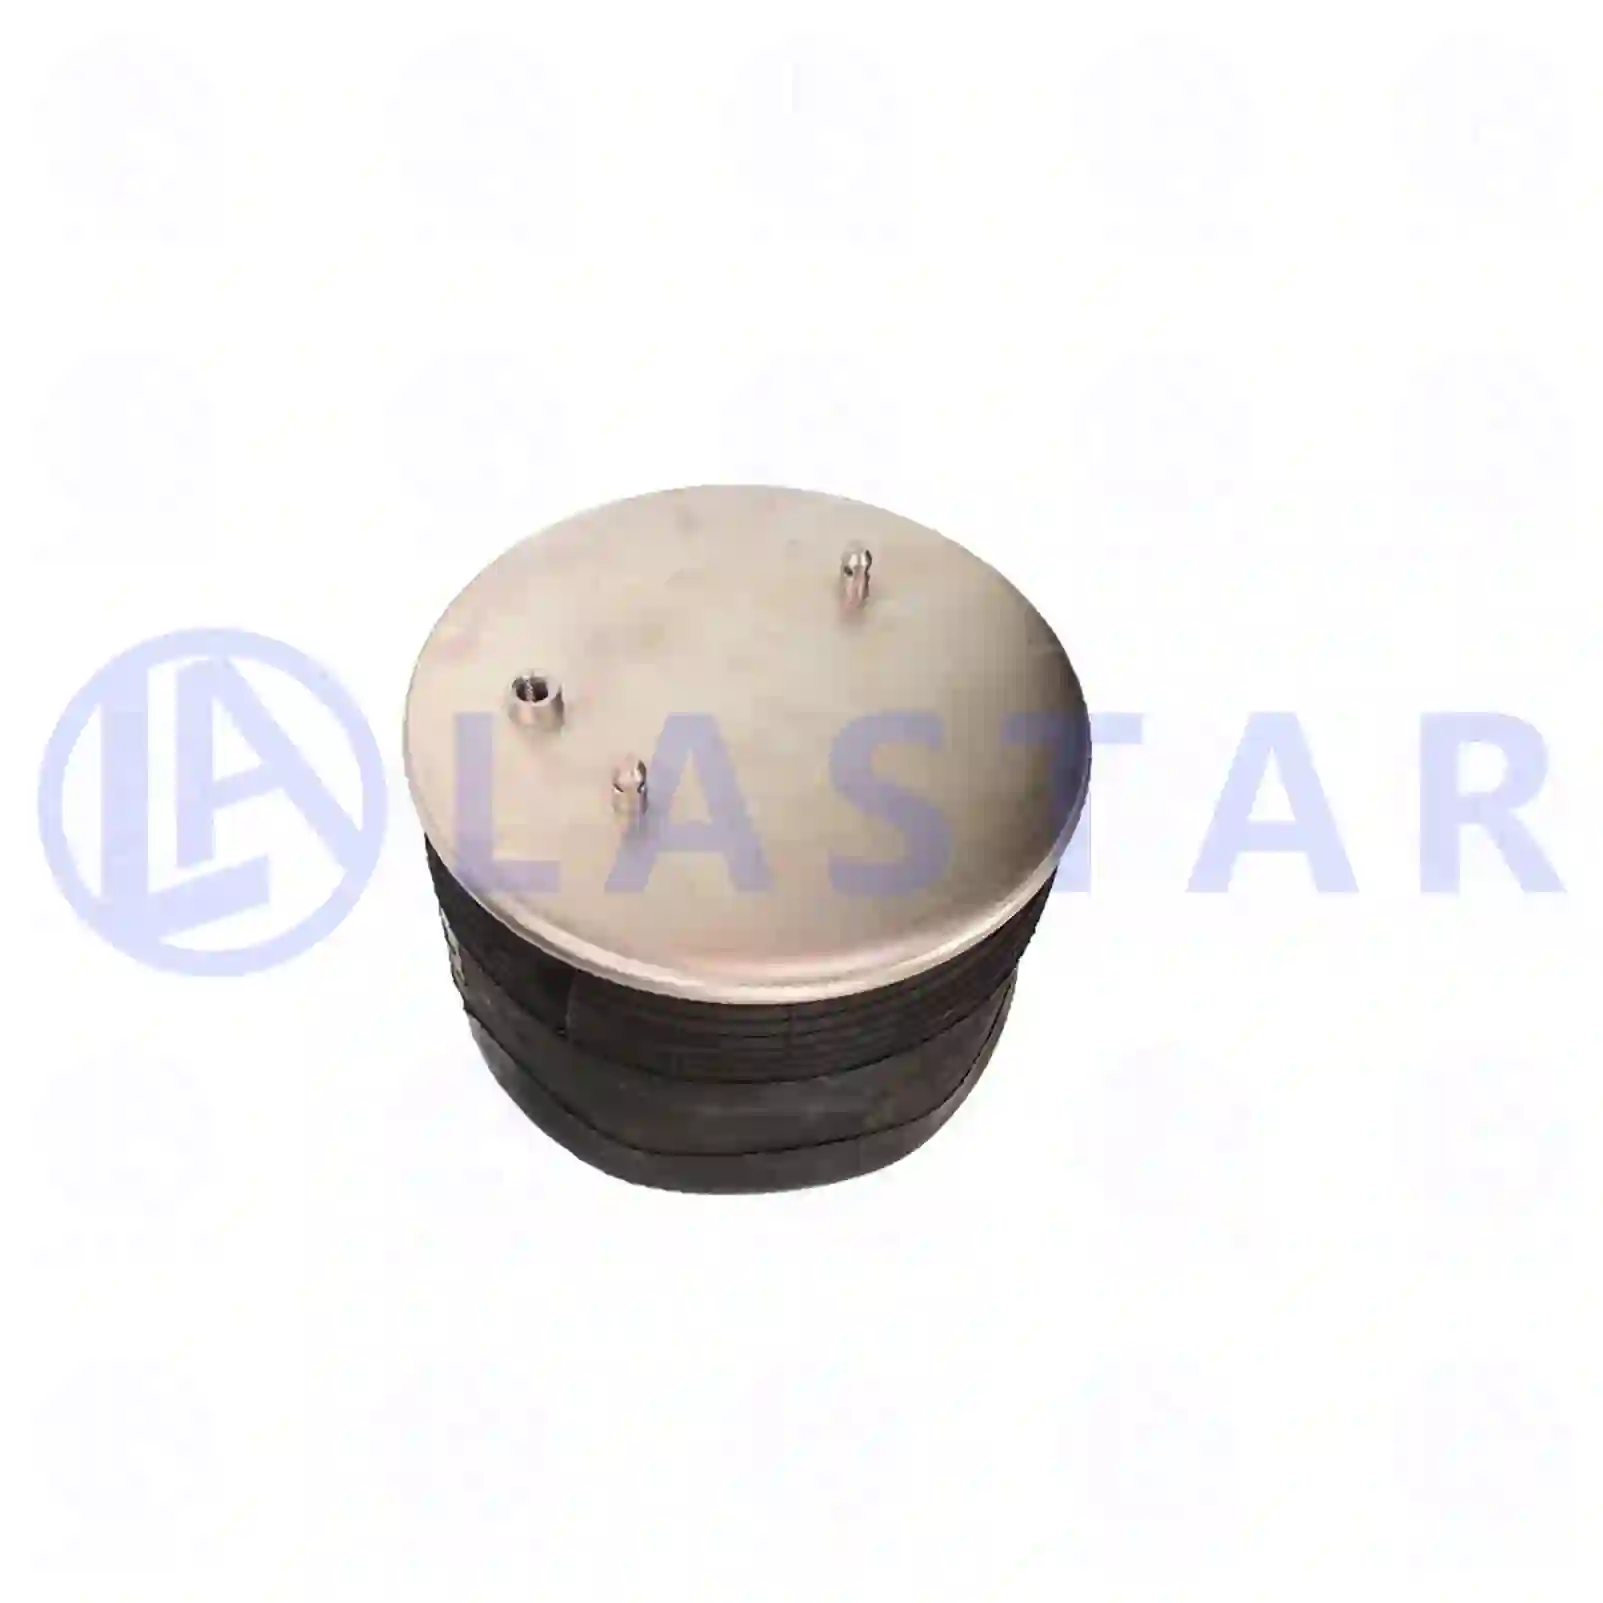 Air spring, with steel piston, with adapter, 77730115, MLF7141, 1440301, 470920, 488265, ZG40801-0008 ||  77730115 Lastar Spare Part | Truck Spare Parts, Auotomotive Spare Parts Air spring, with steel piston, with adapter, 77730115, MLF7141, 1440301, 470920, 488265, ZG40801-0008 ||  77730115 Lastar Spare Part | Truck Spare Parts, Auotomotive Spare Parts